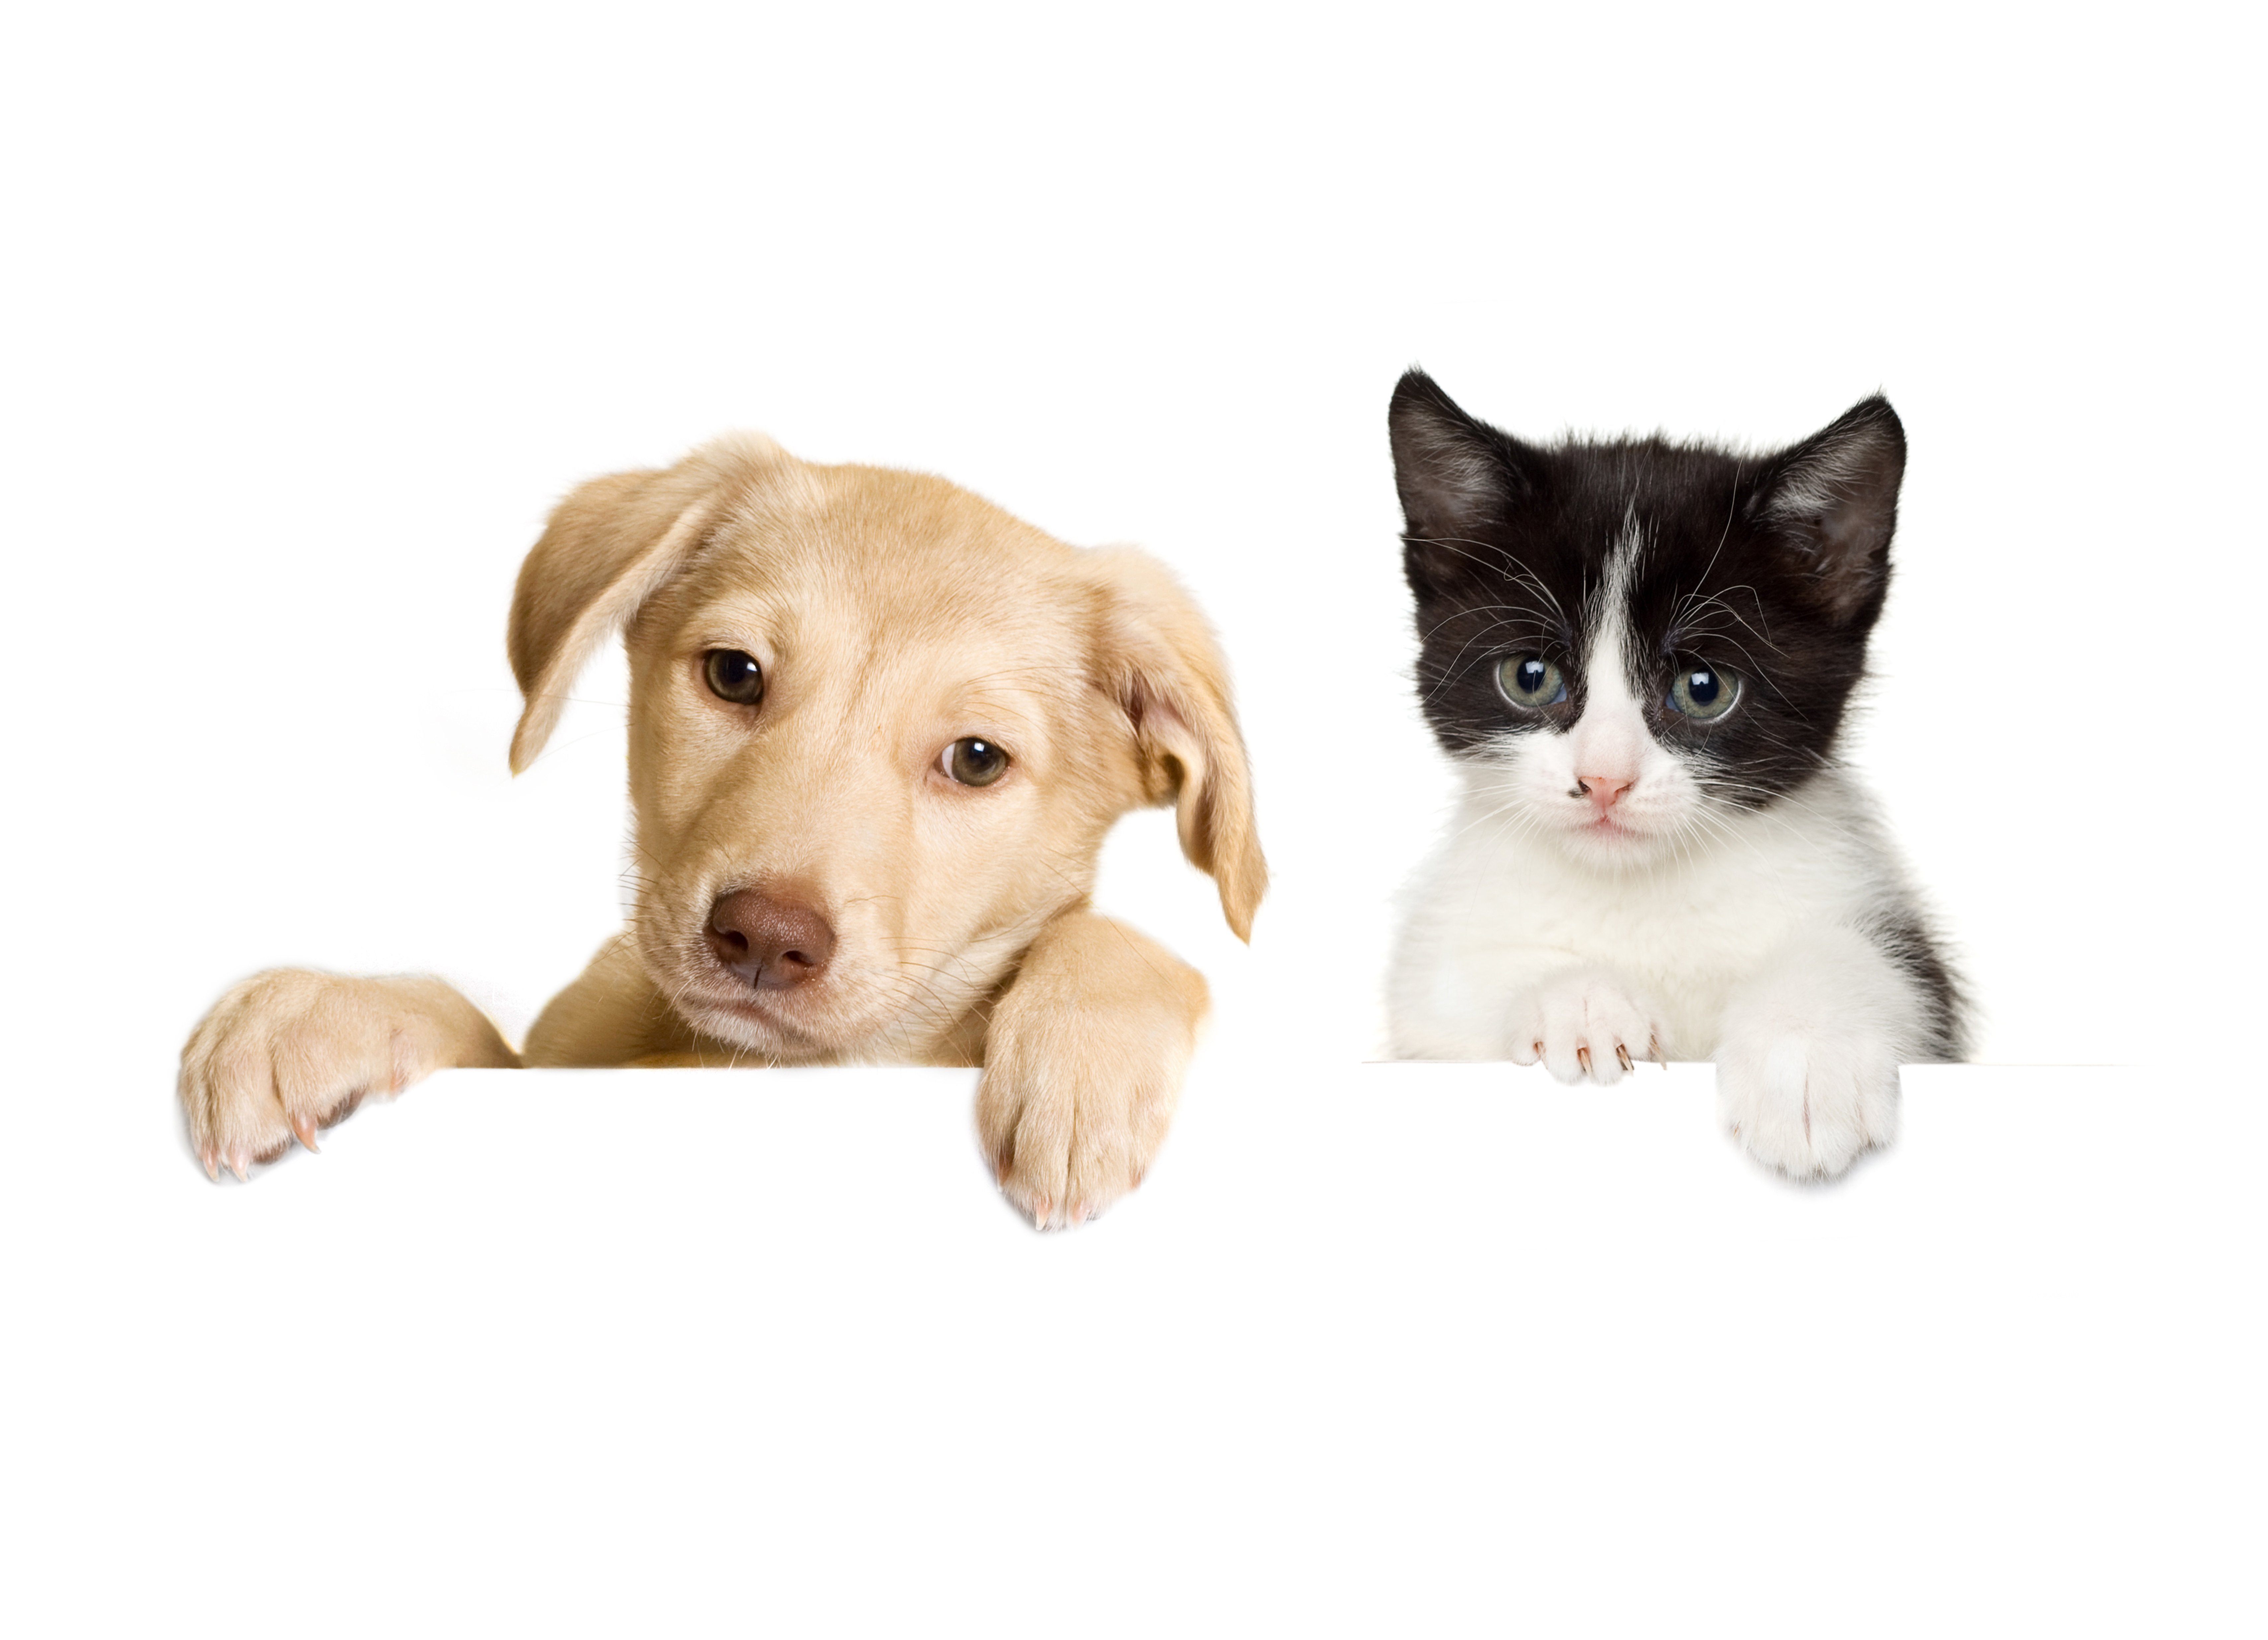 dog and cat wallpaper,mammal,dog breed,canidae,puppy,cat